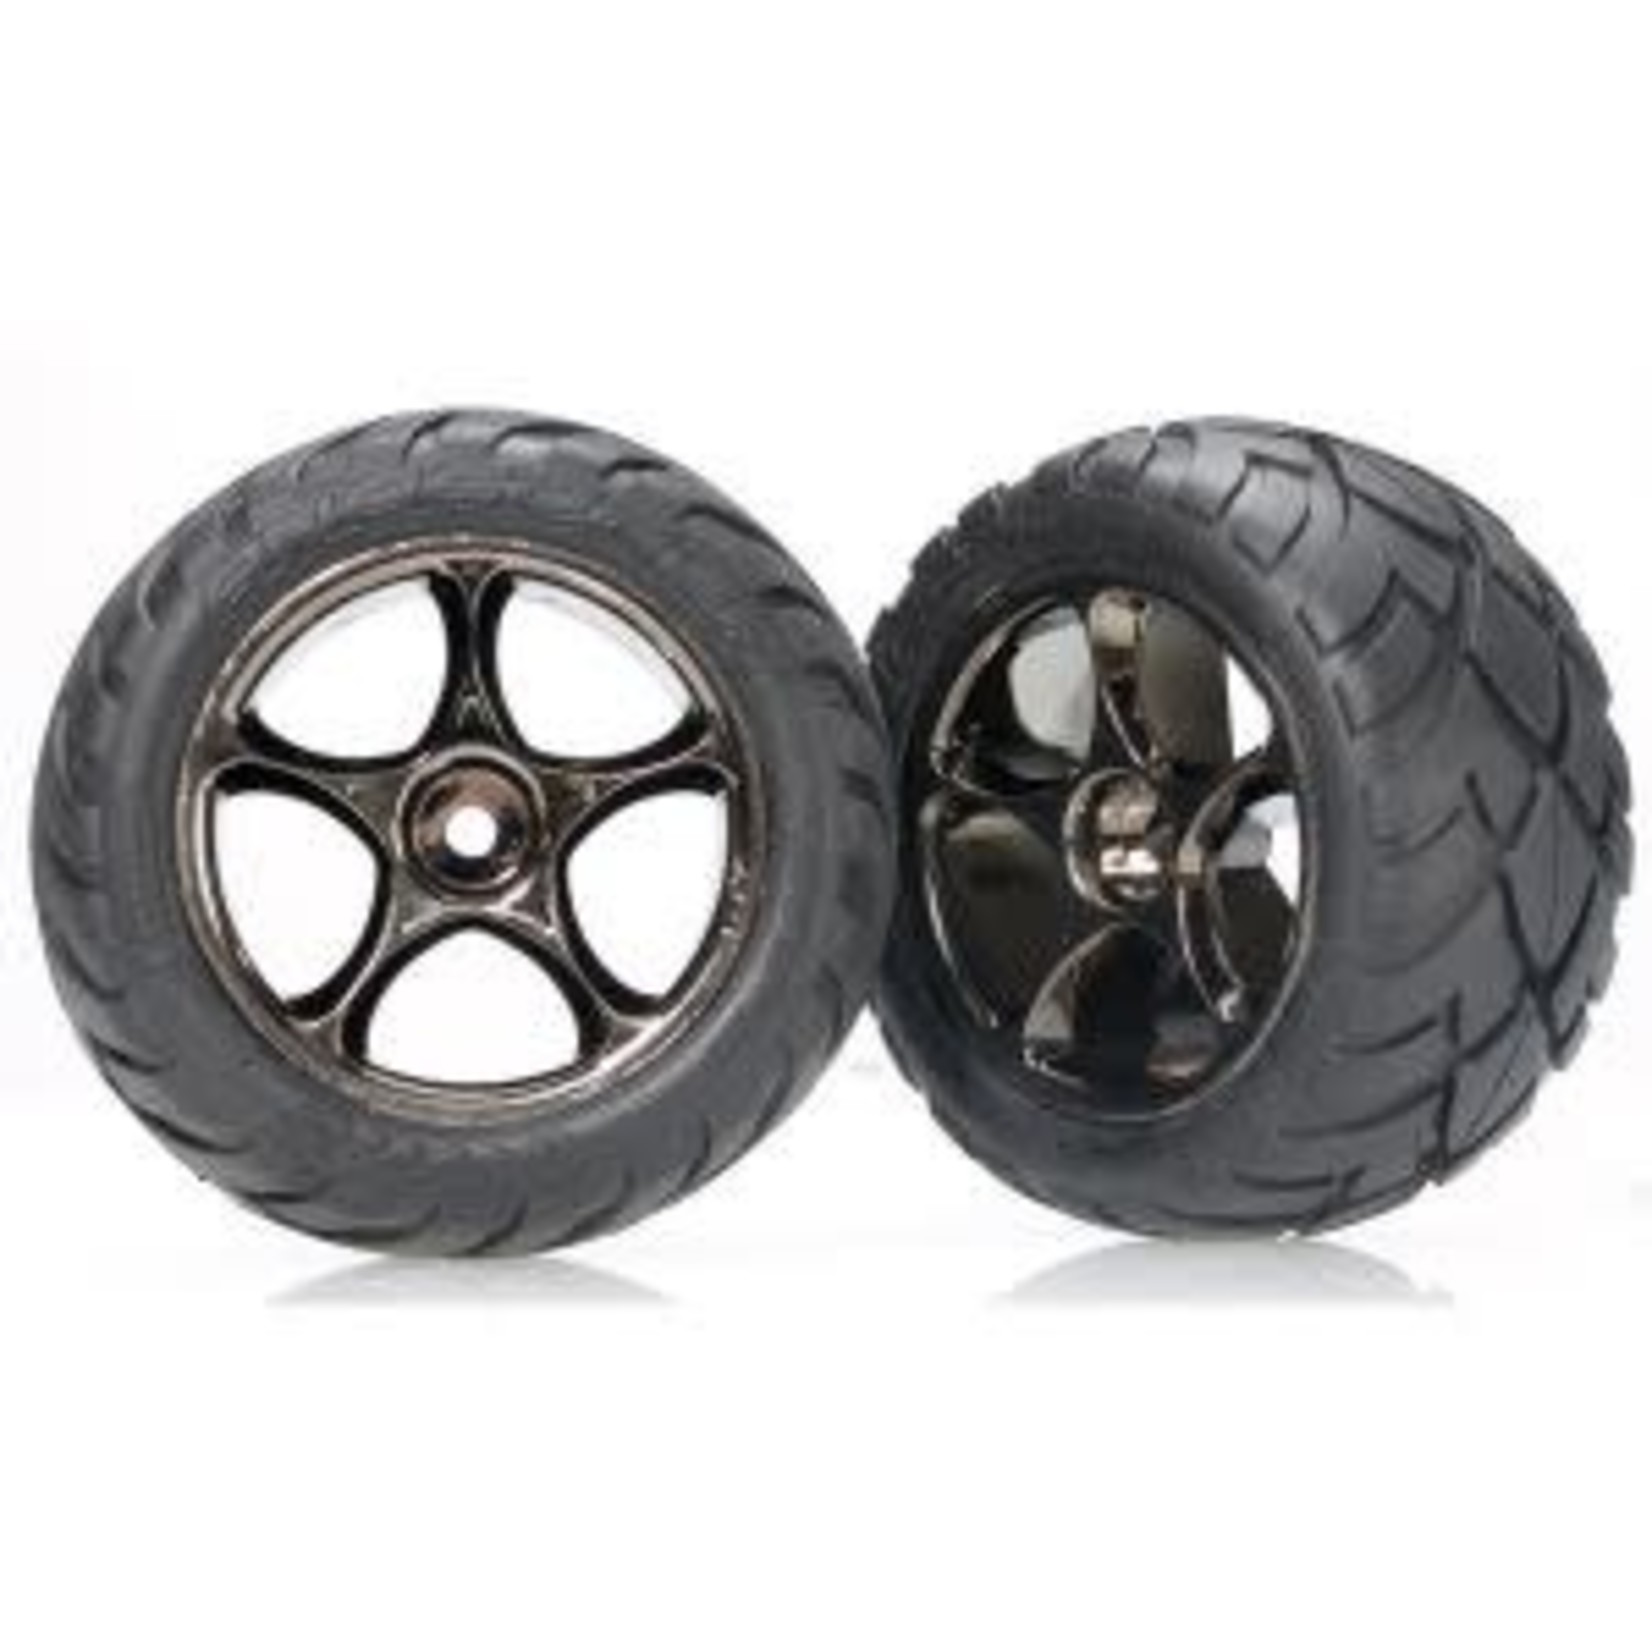 Traxxas 2478A   Tires & wheels, assembled (Tracer 2.2" black chrome wheels, Anaconda® 2.2" tires with foam inserts) (2) (Bandit rear)